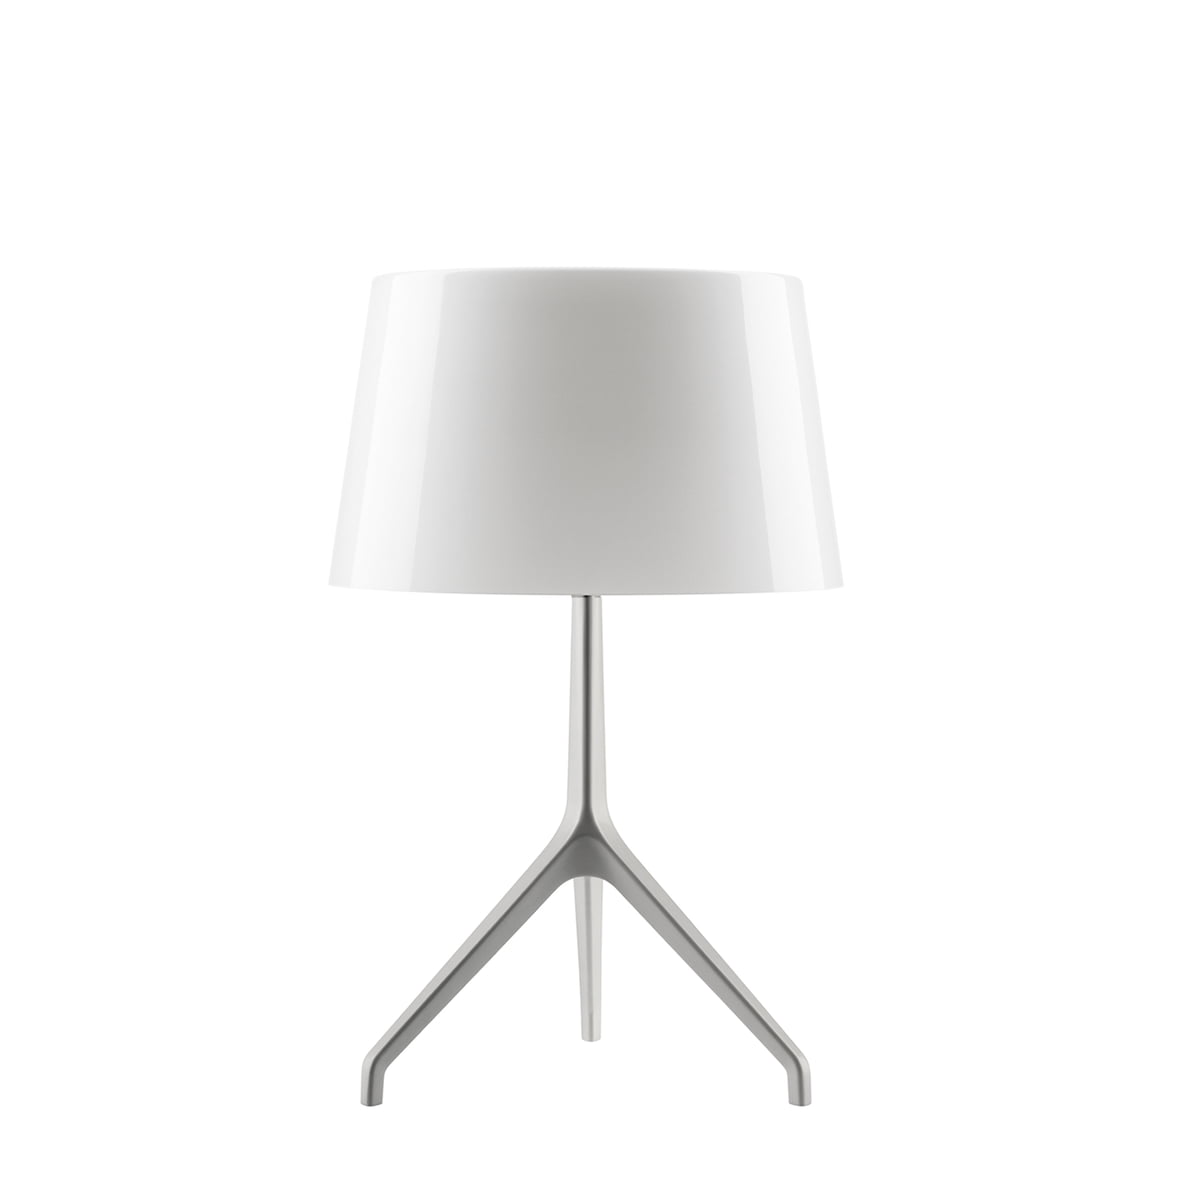 Terminologie seks Trappenhuis Lumiere XXS table lamp by Foscarini in our shop